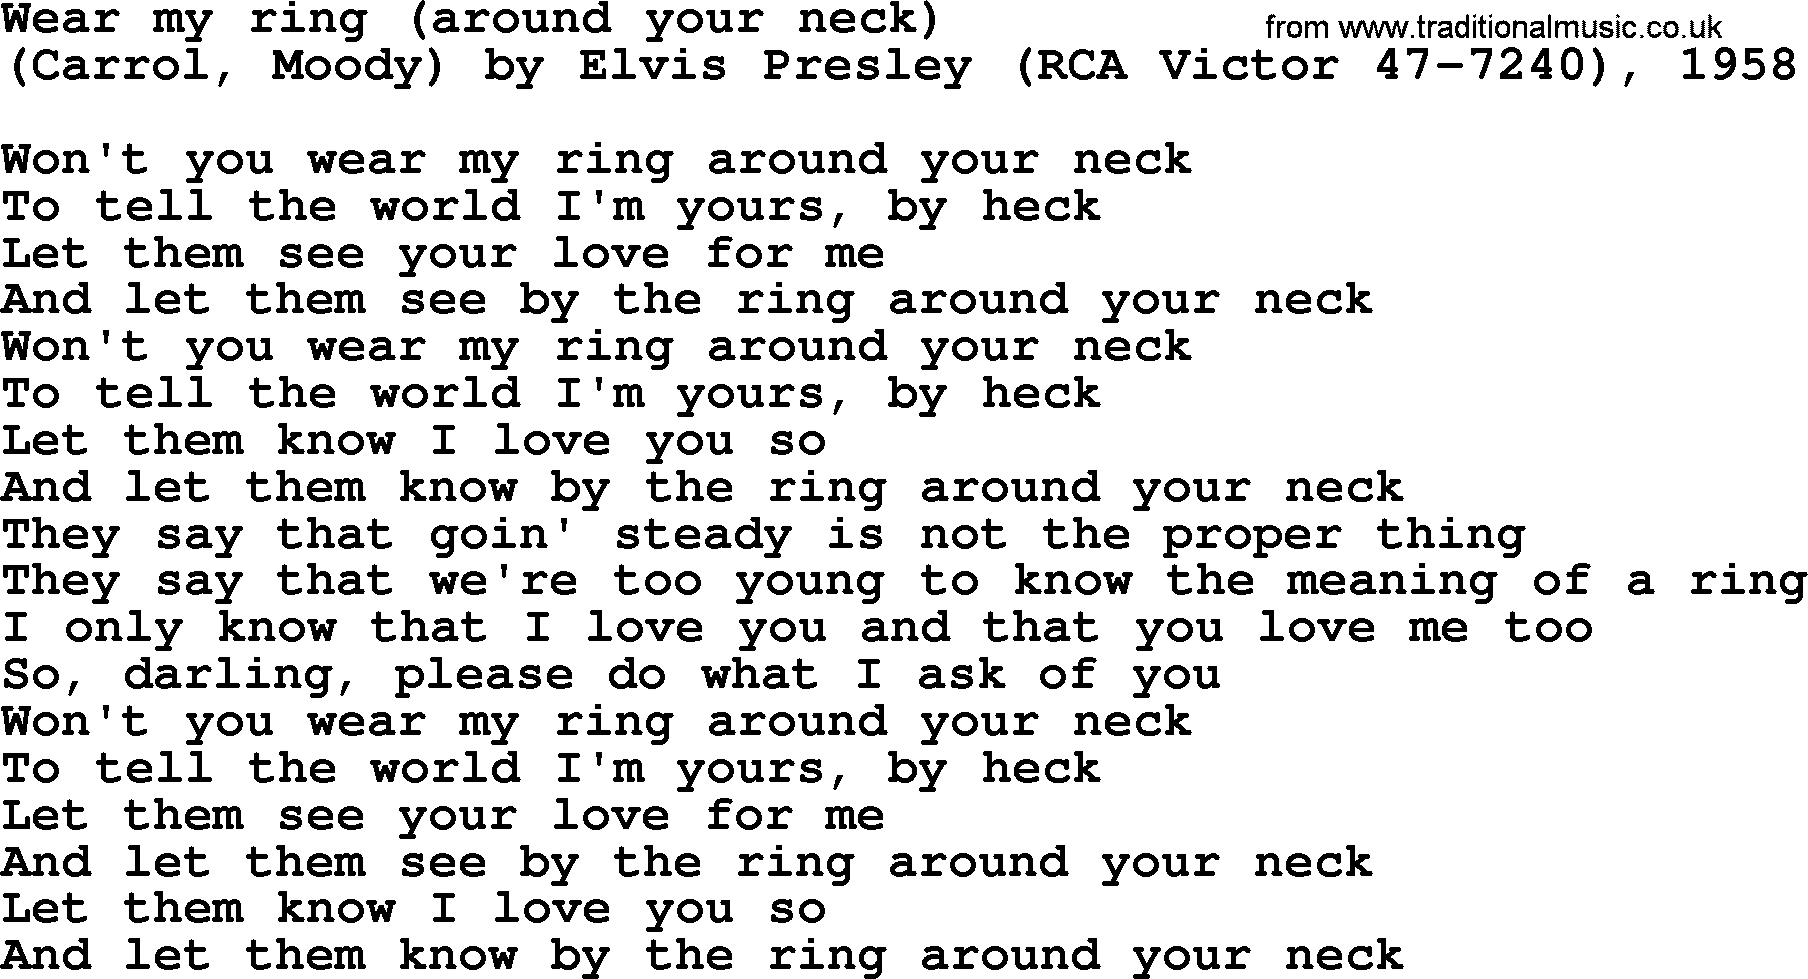 Bruce Springsteen song: Wear My Ring(Around Your Neck) lyrics